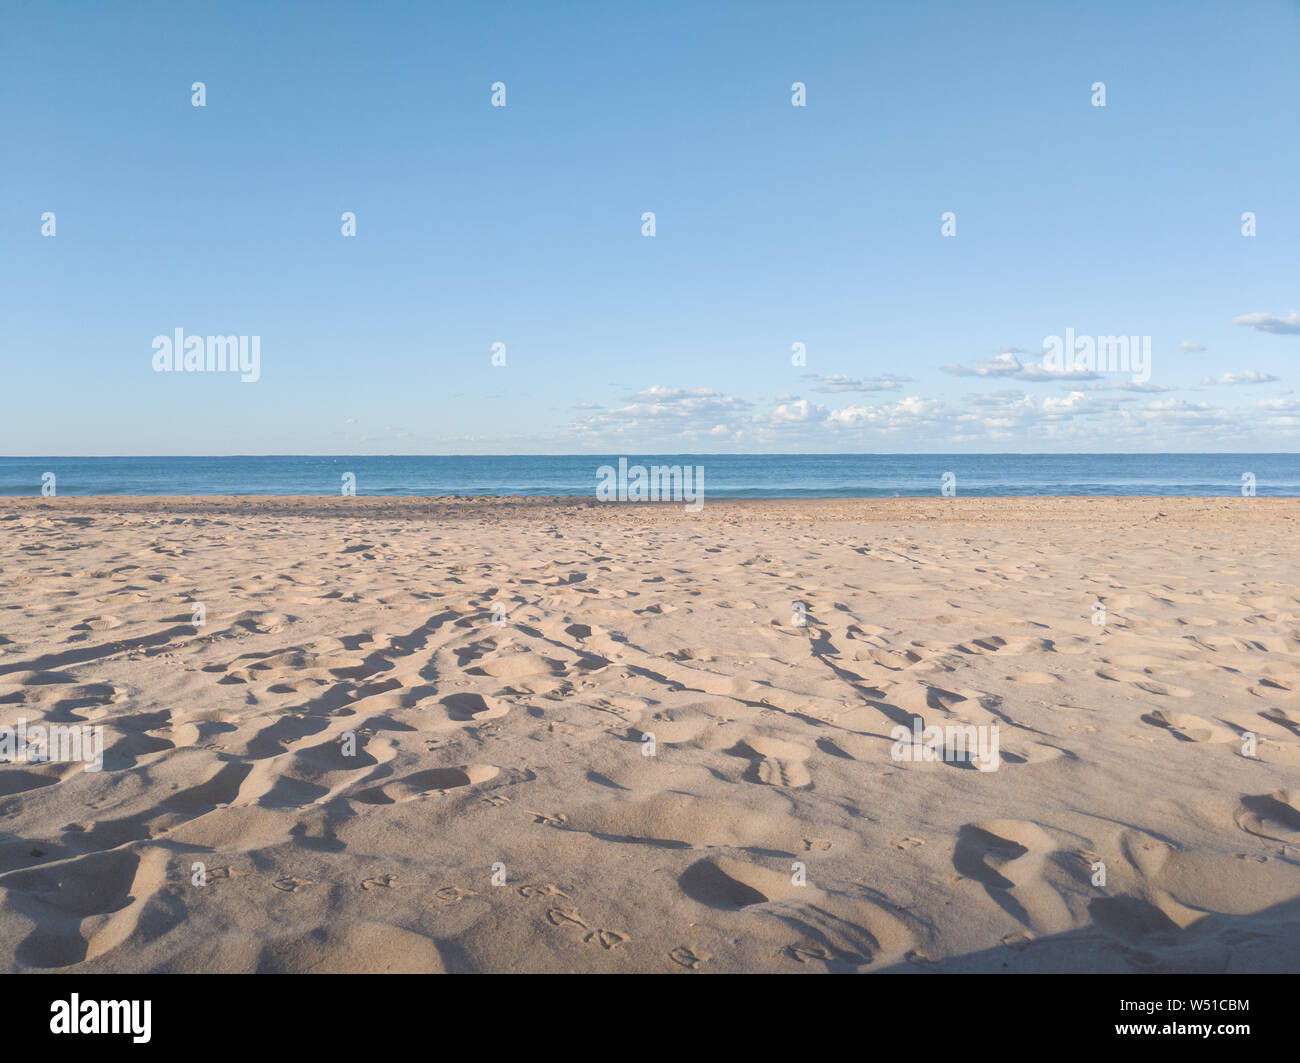 Manly Beach, Sydney, clear blue sky and footprints in the sand Stock Photo